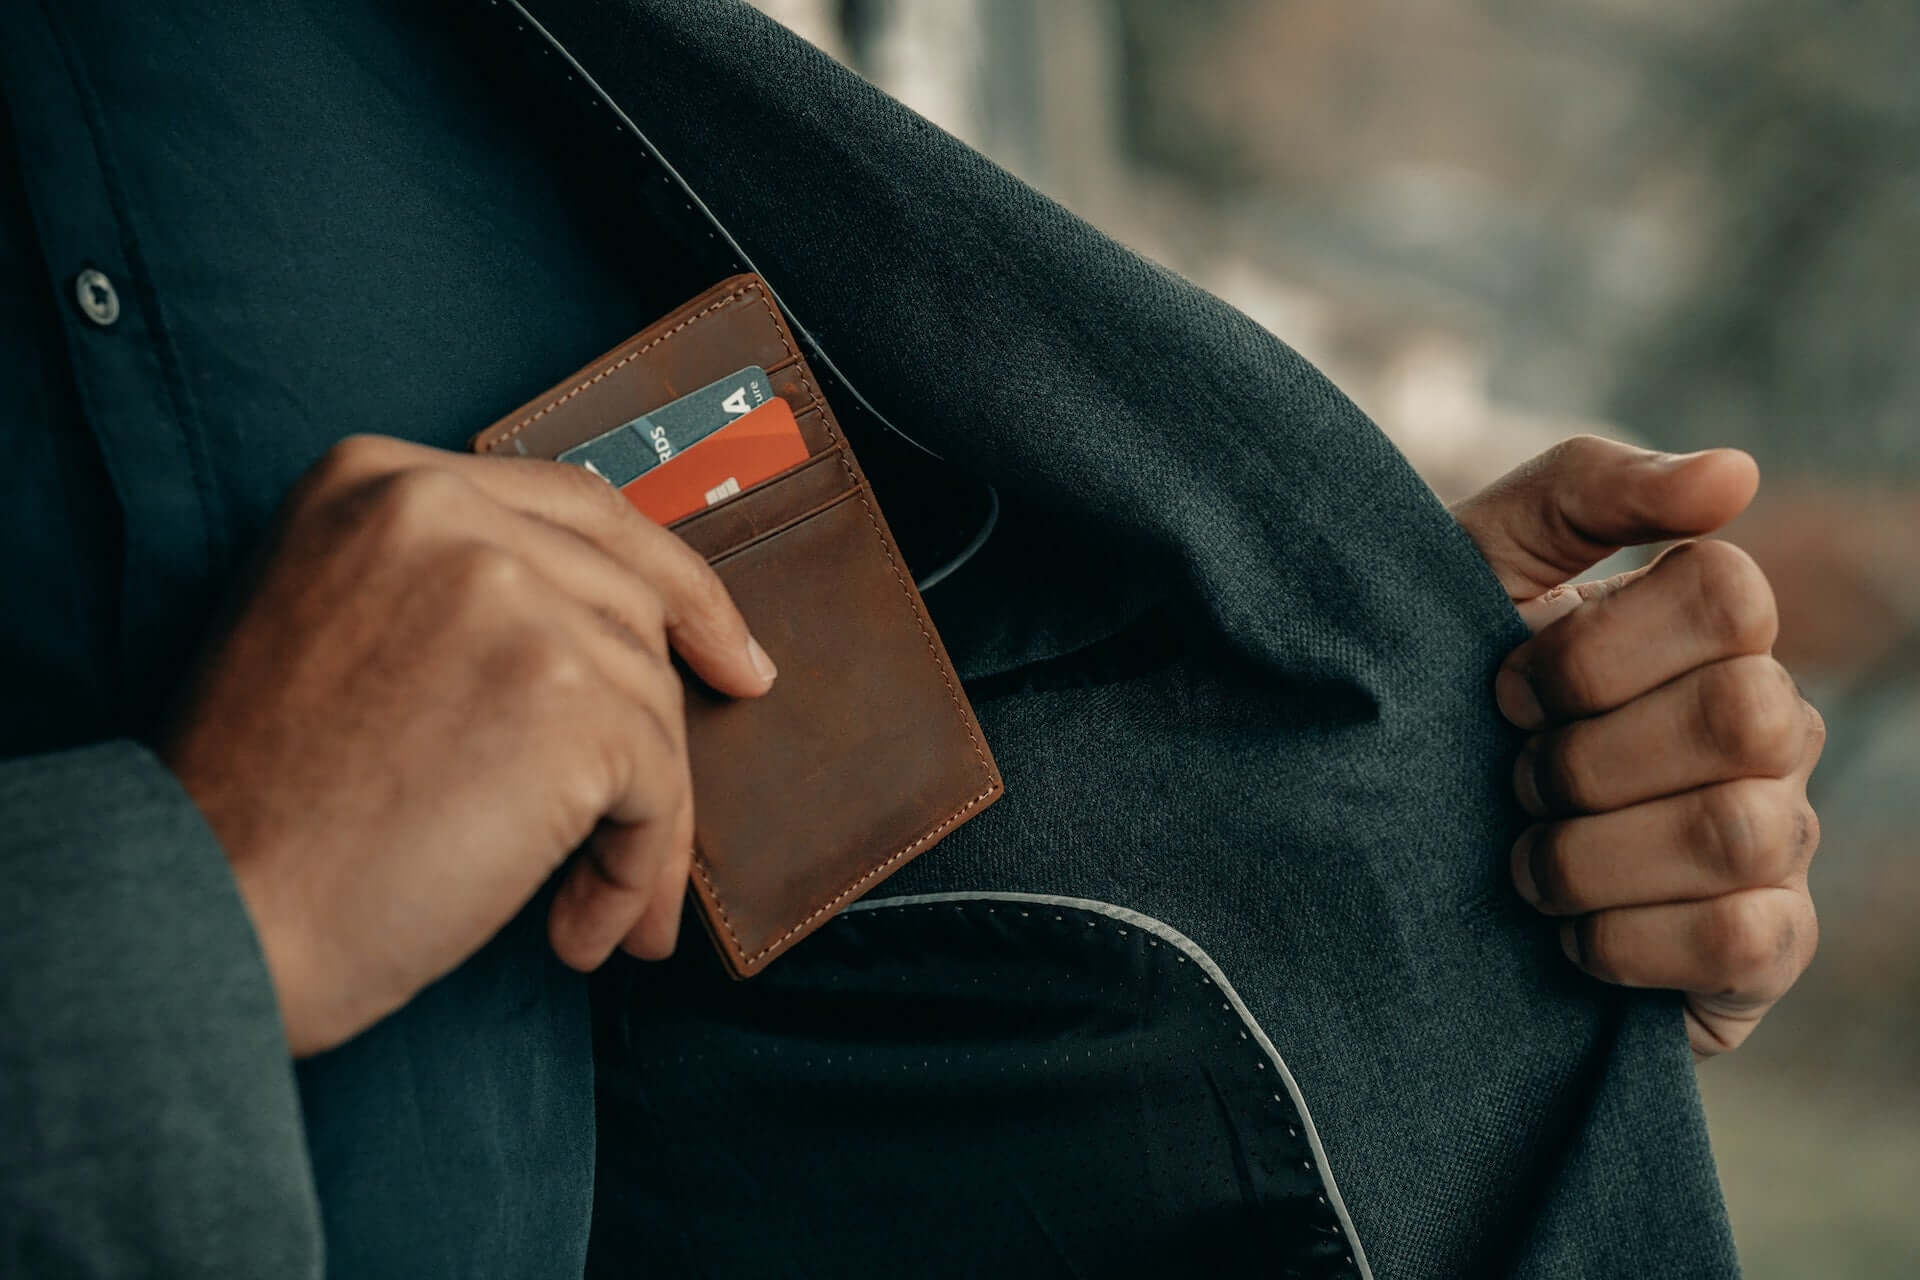 A brown leather wallet is slipped into the interior pocket of a black coat.